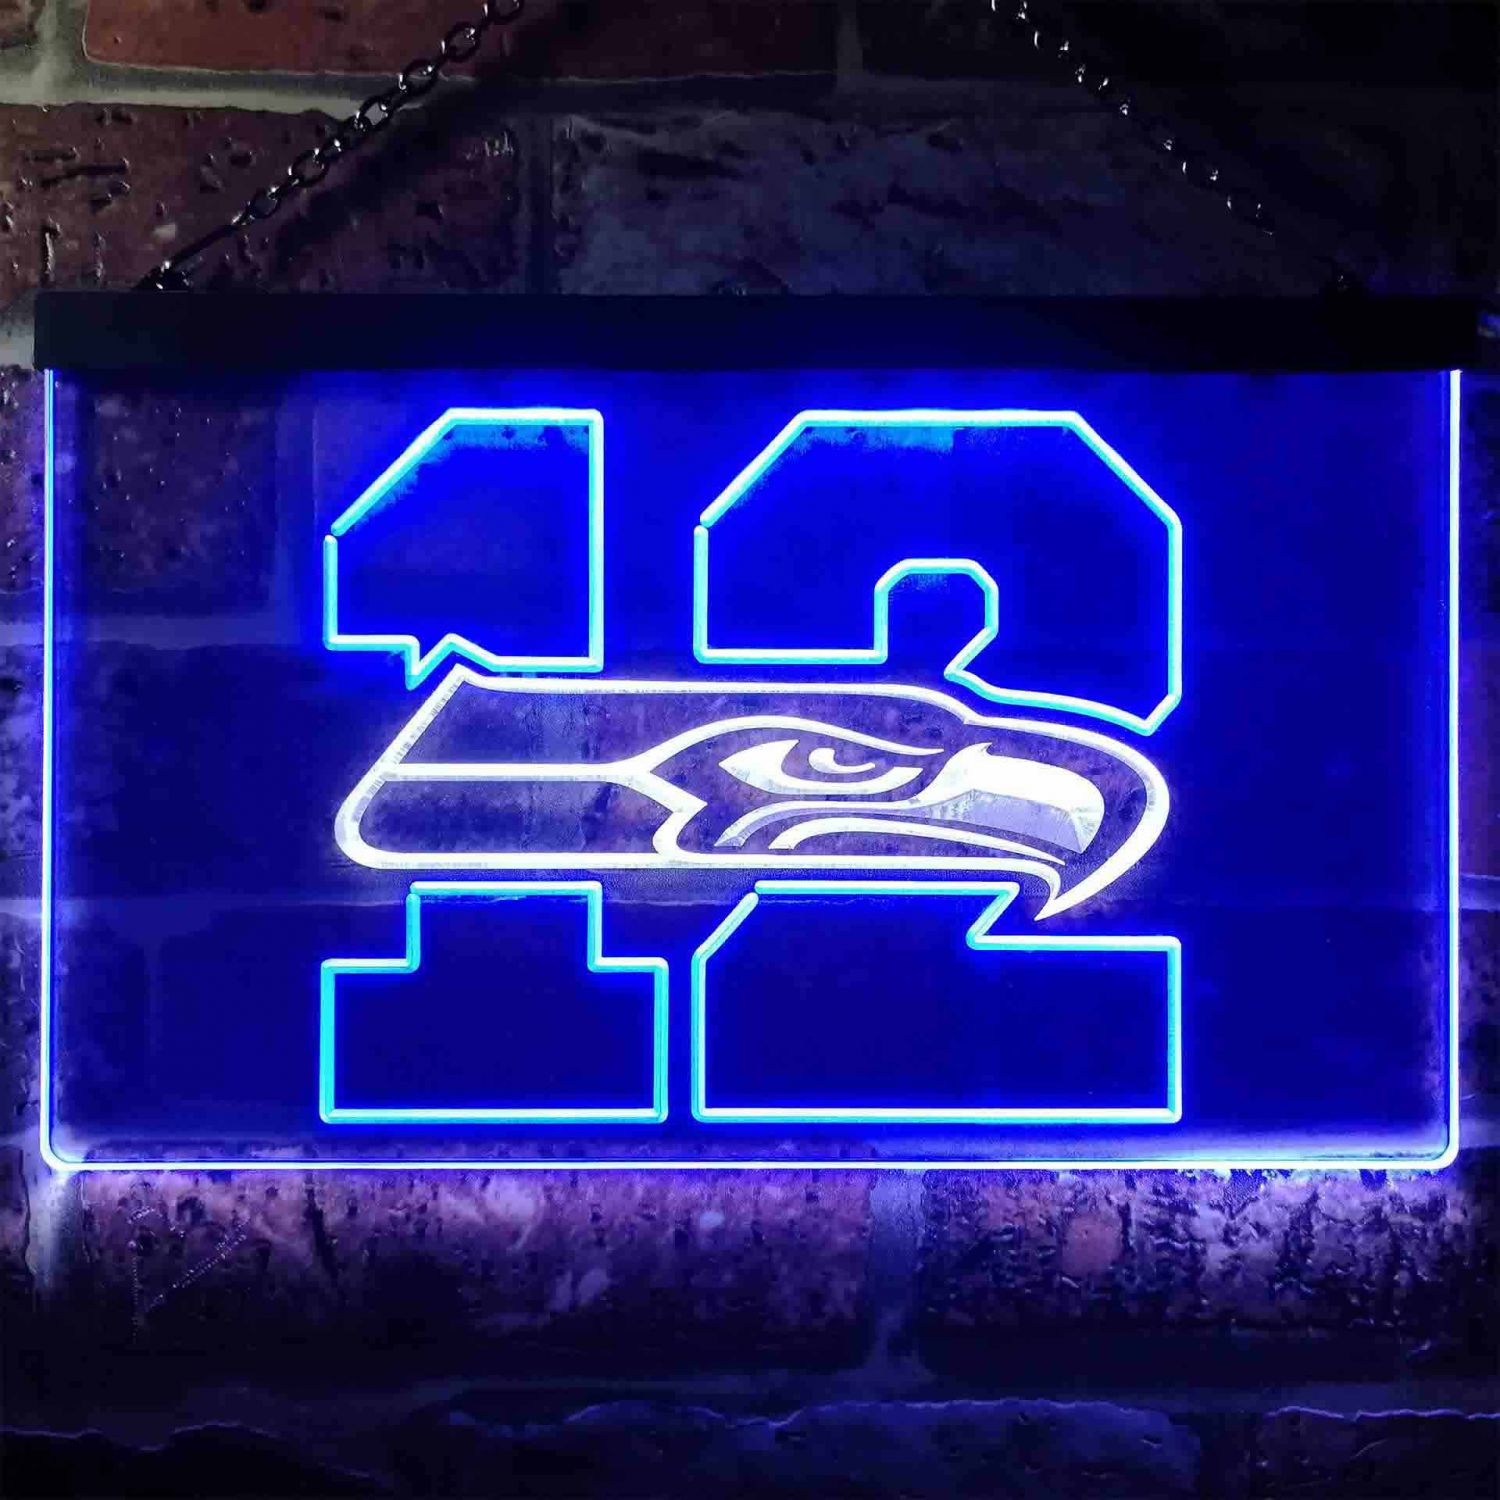 Seattle Seahawks 12th man LED Neon Sign - neon sign - LED sign - shop